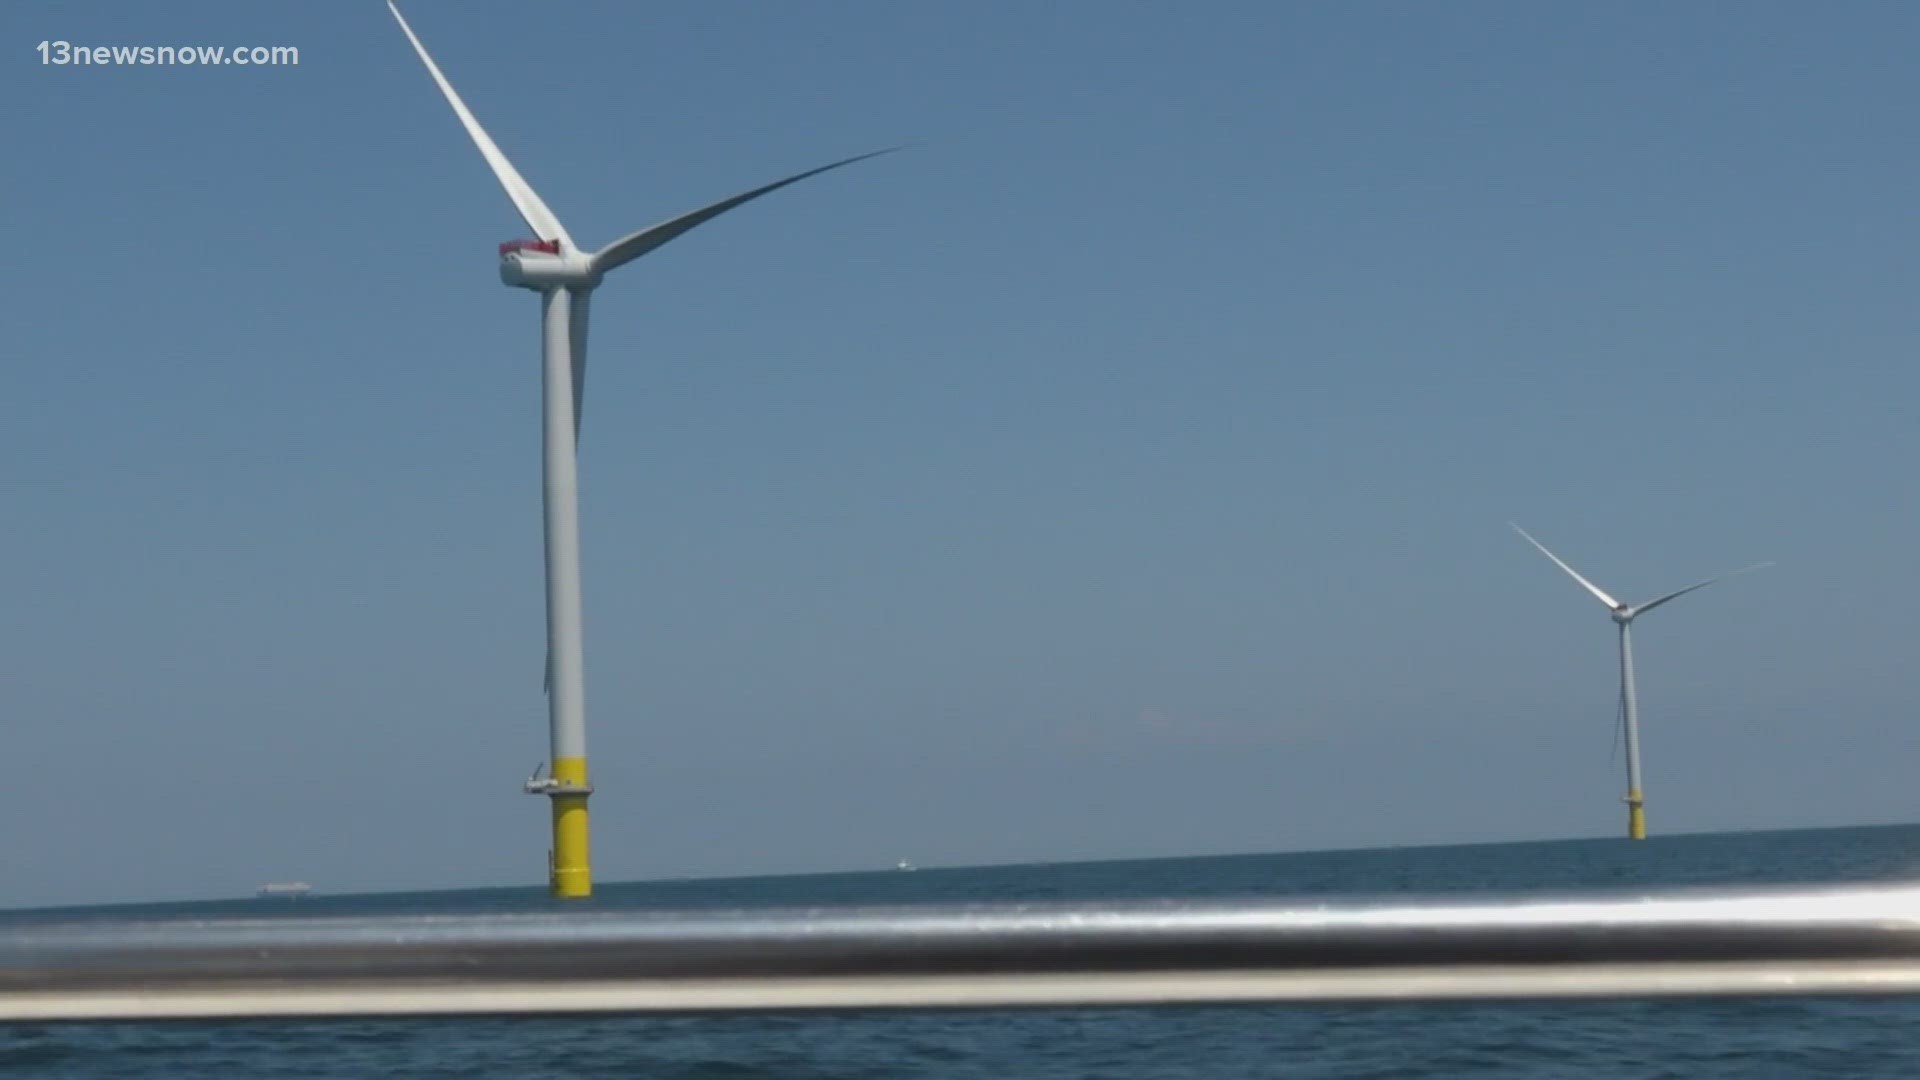 World's largest wind turbine is now fully operational and connected